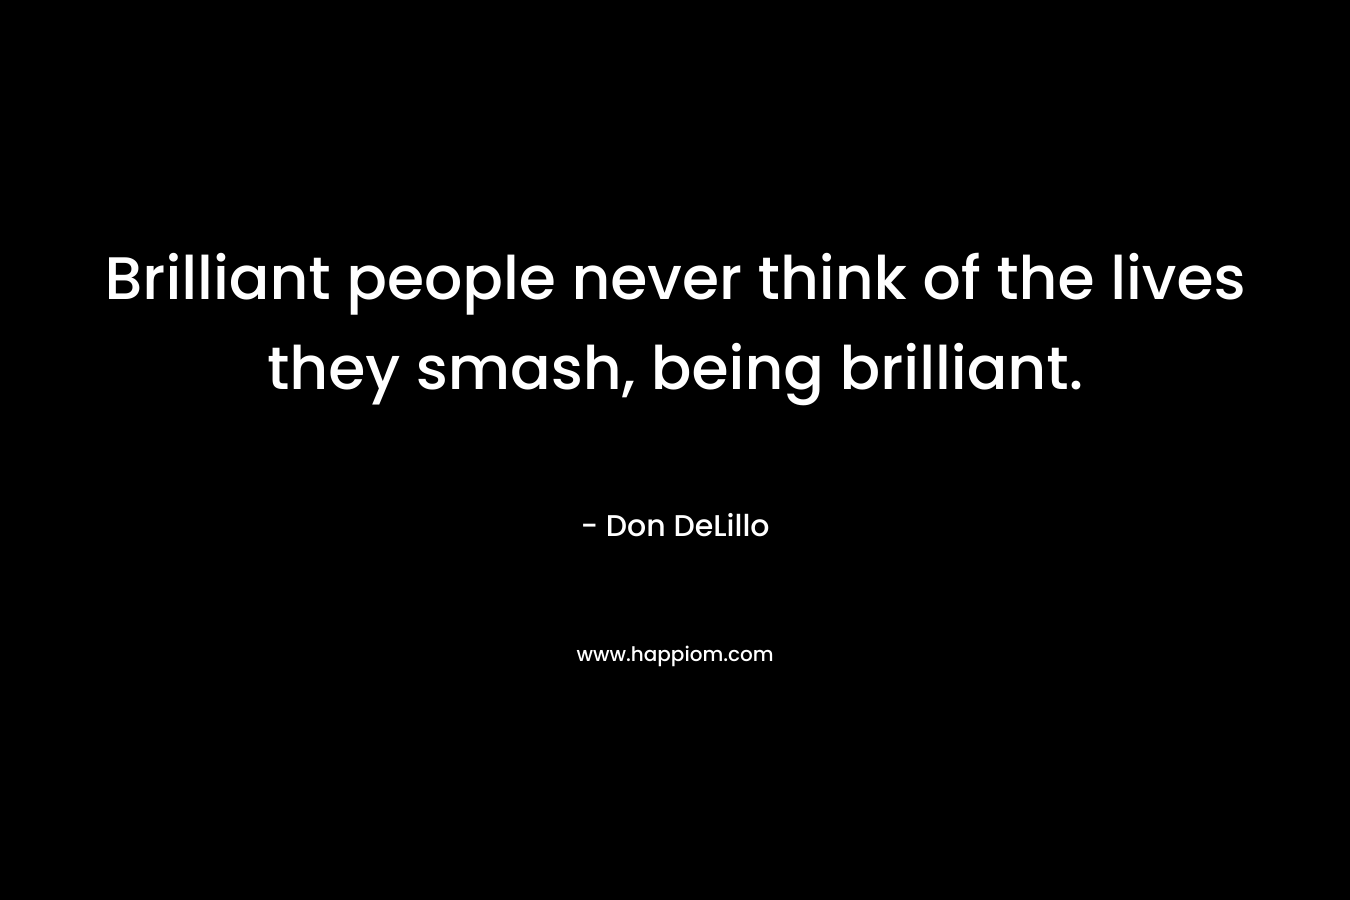 Brilliant people never think of the lives they smash, being brilliant. – Don DeLillo